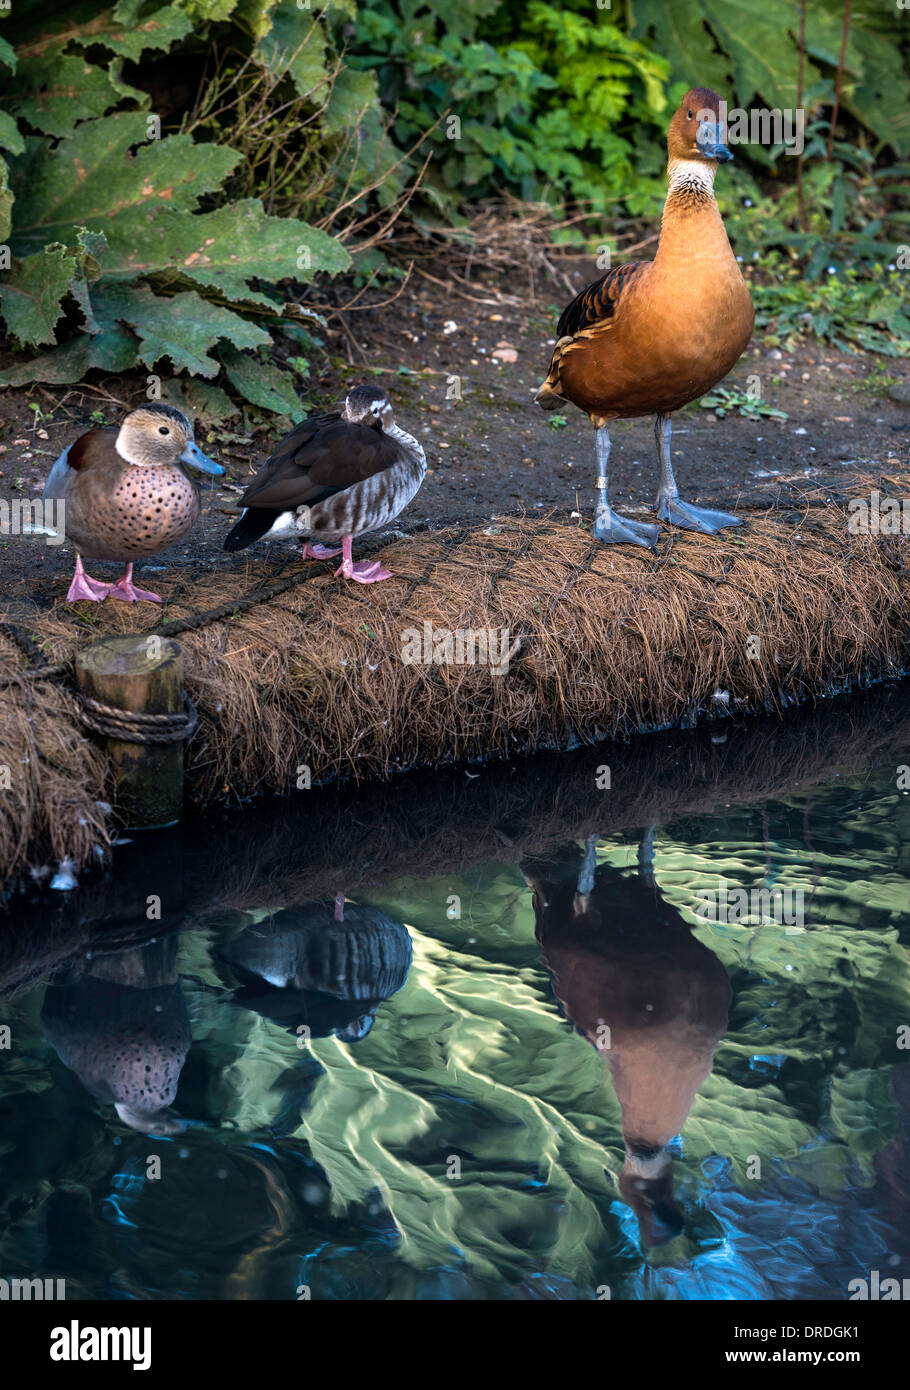 Birds and ducks Wetlands at The Wildfowl & Wetlands Trust (WWT) London England Great Britain UK Stock Photo